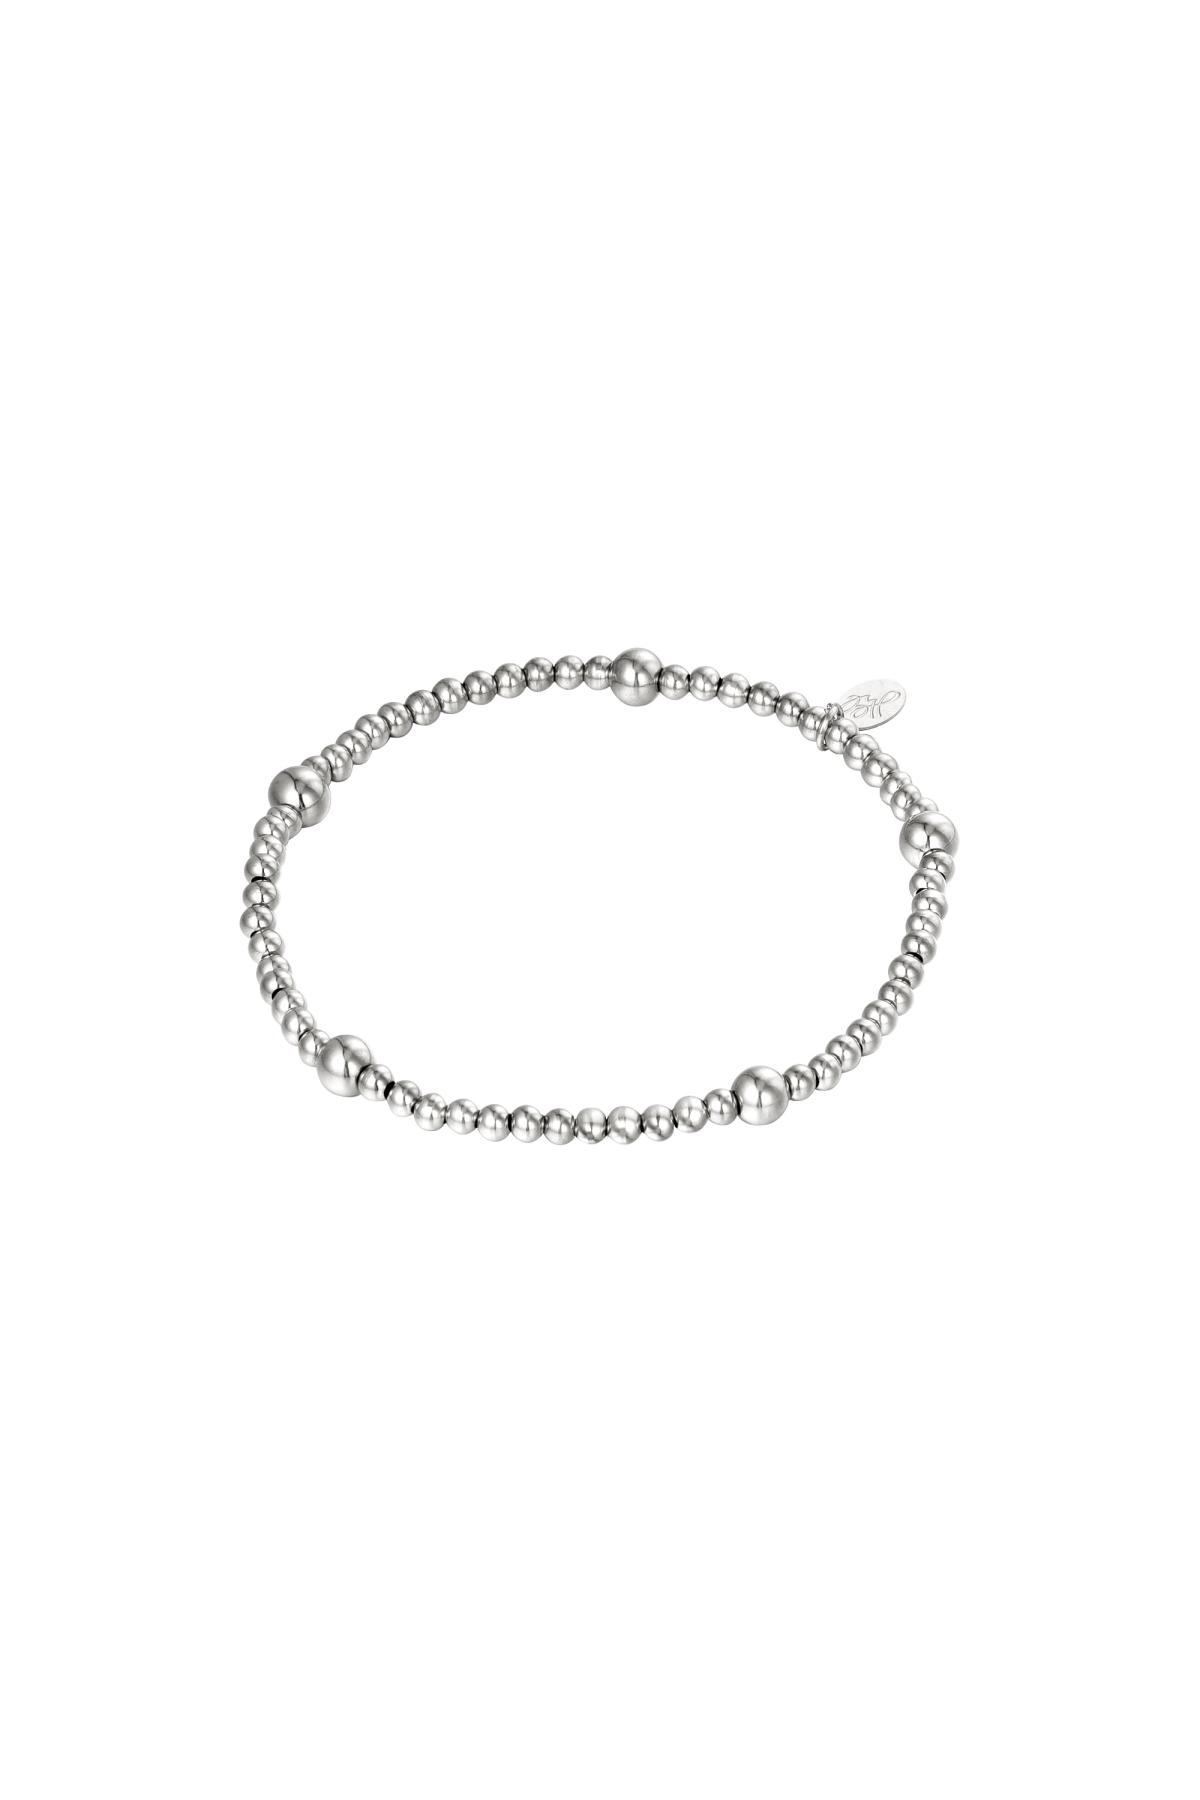 Bracciale Perline Silver Stainless Steel h5 